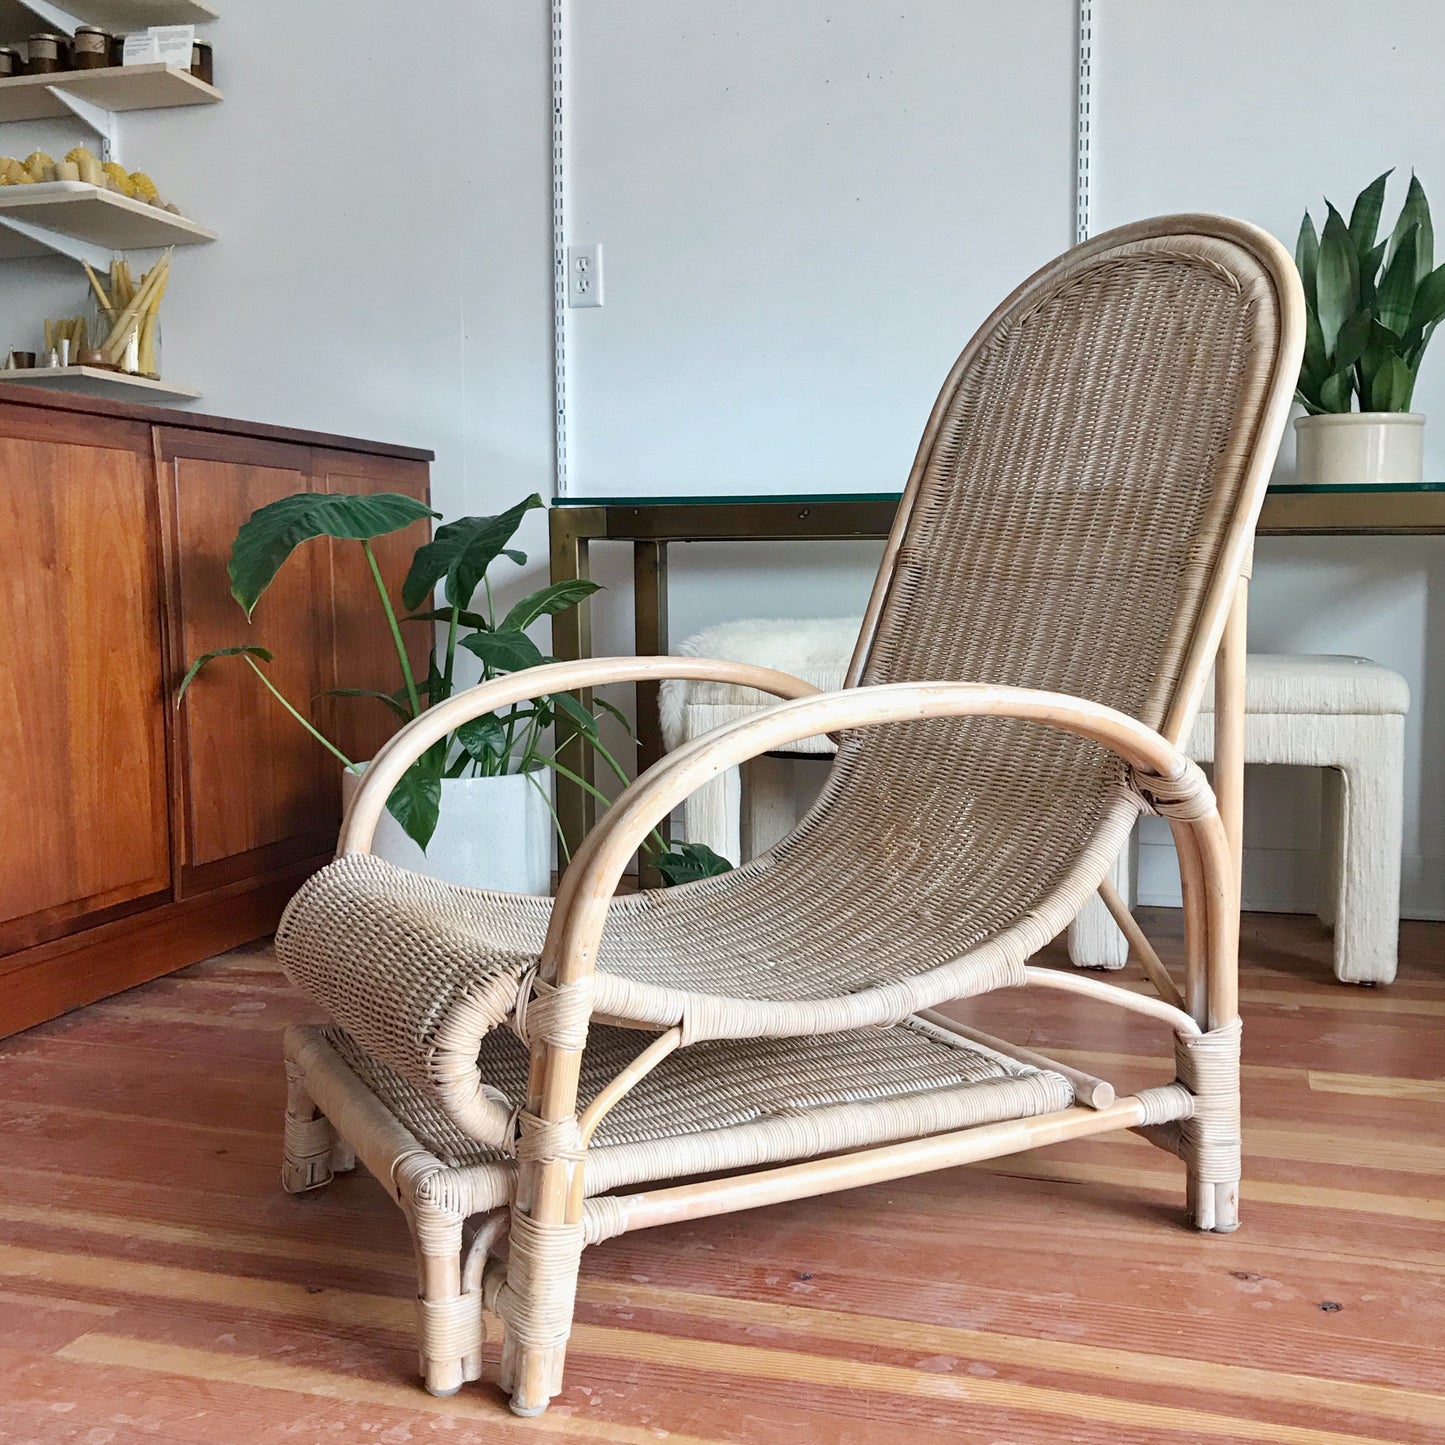 Vintage Wicker Lounger with Footrest